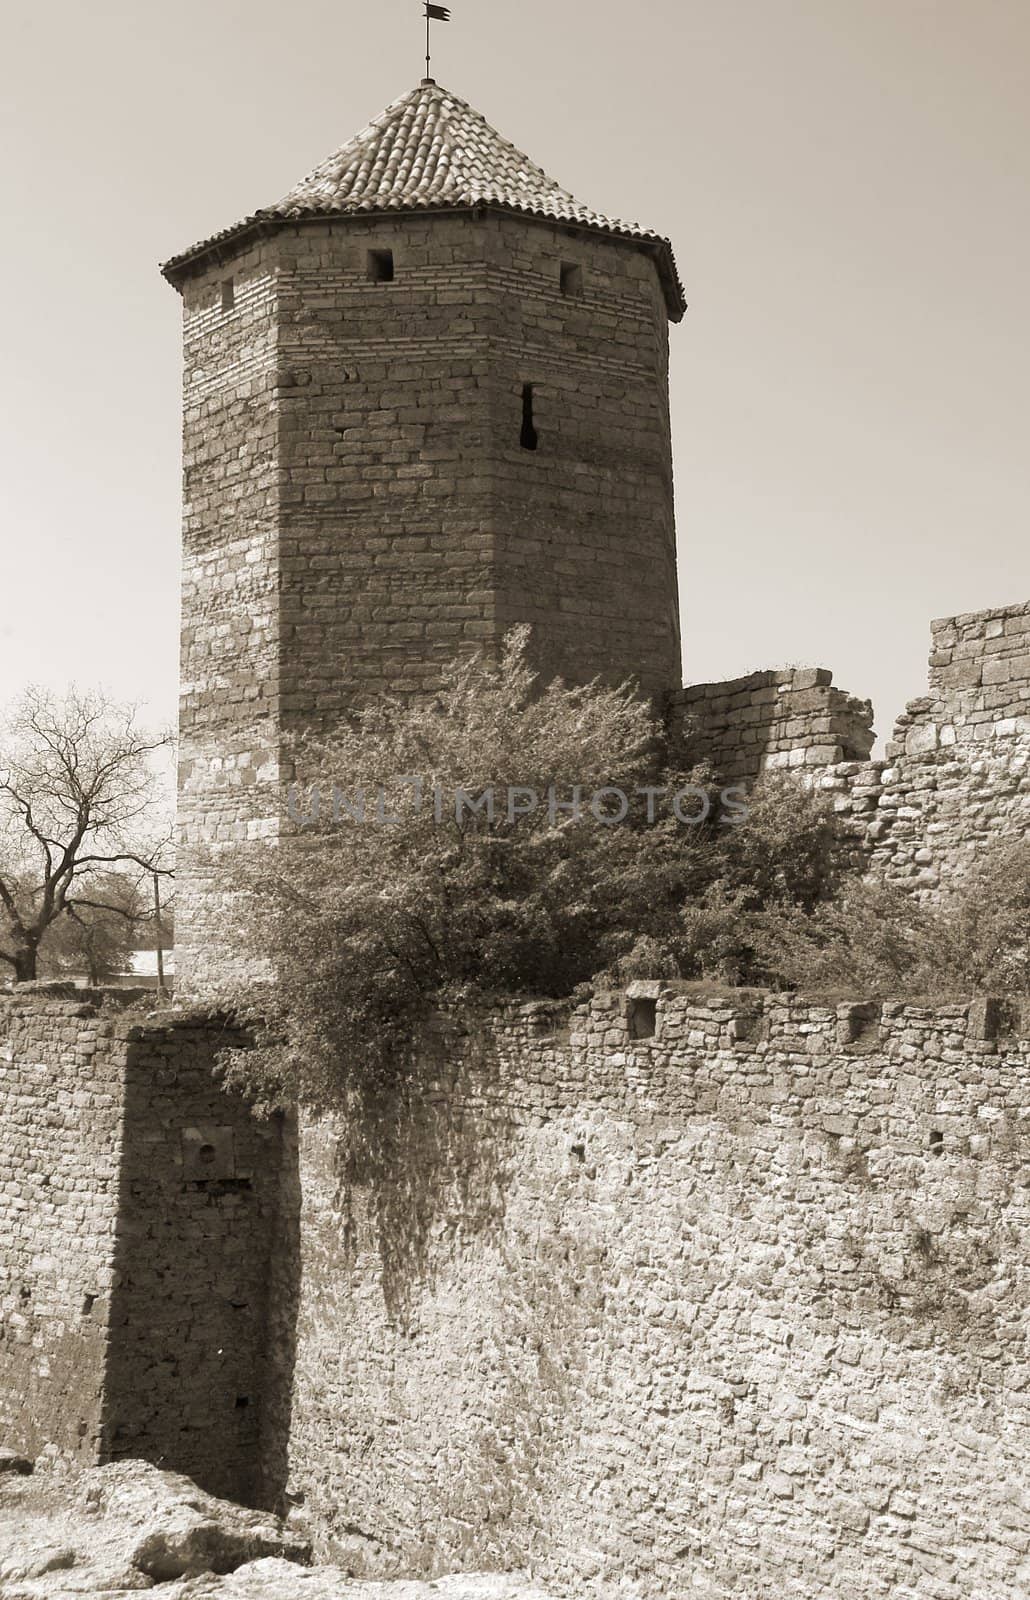 Watchtower in a fortress of the ancient city of Akkerman